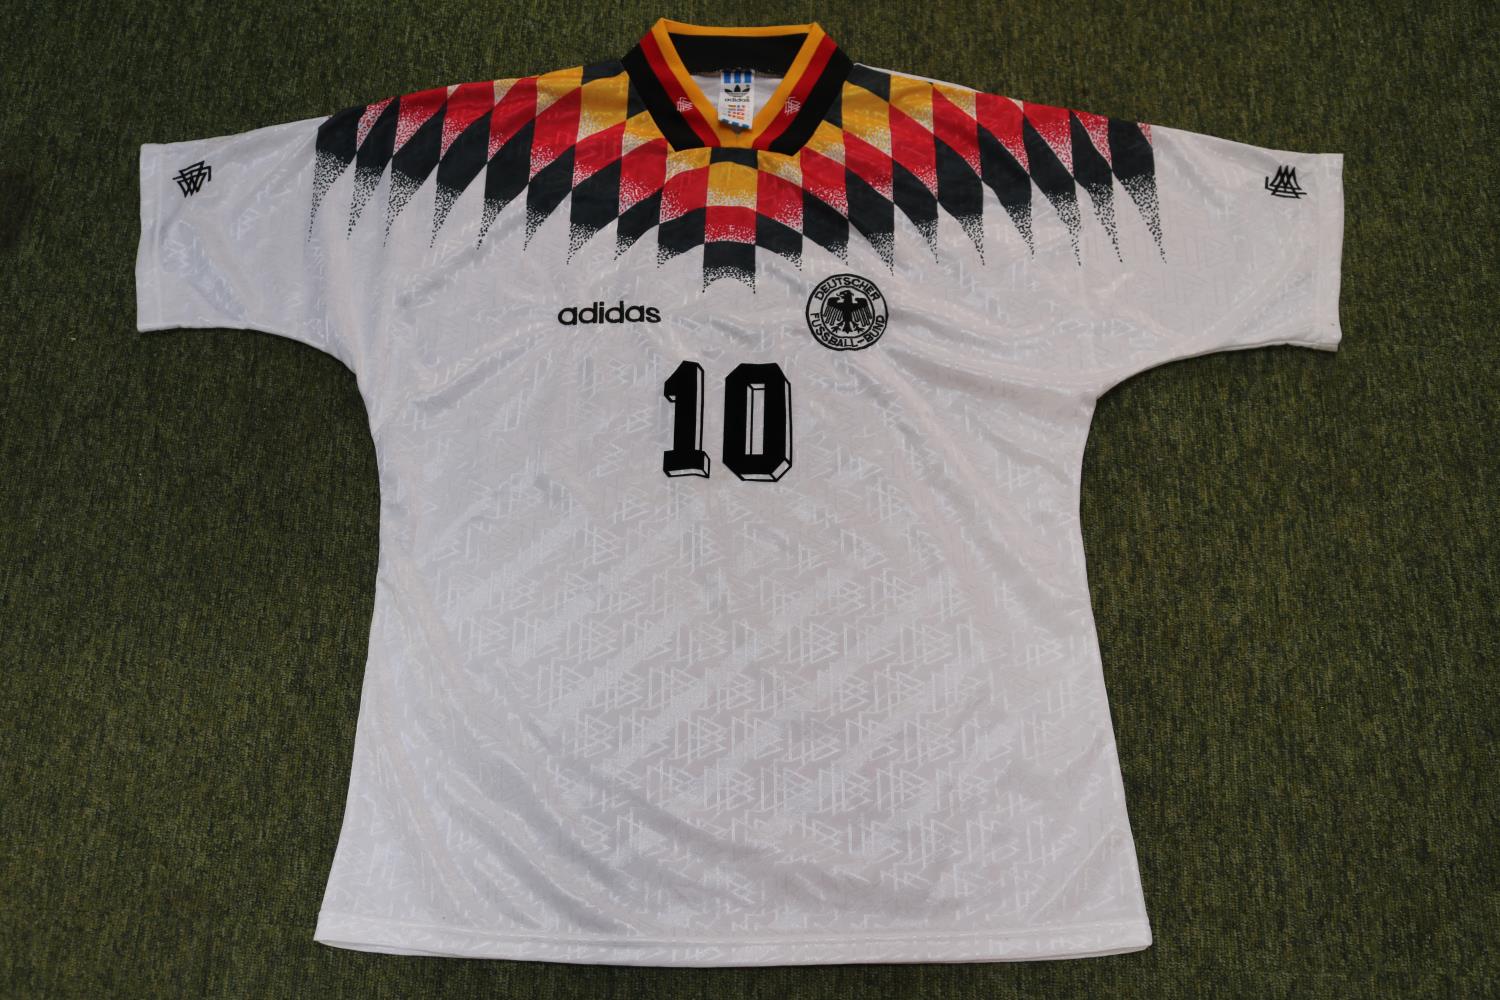 LOTHAR MATTHAUS 1994 FIFA WORLD CUP MATCH WORN #10 GERMANY JERSEY The white short-sleeved jersey was